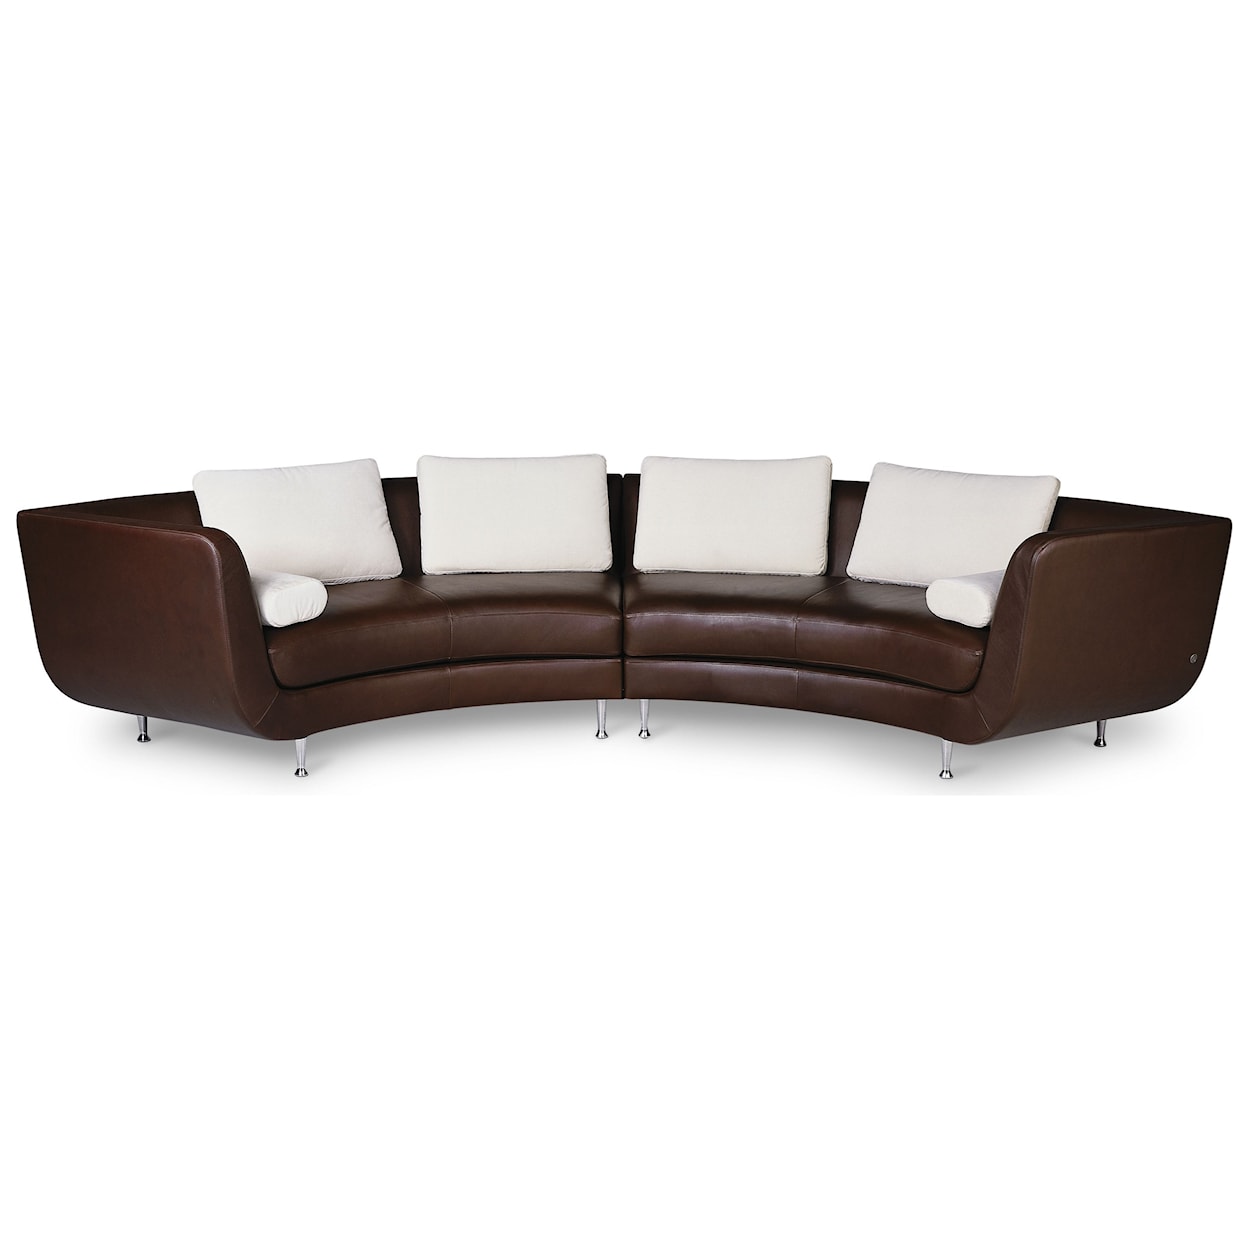 American Leather Menlo Park 4-Seat Sectional Sofa